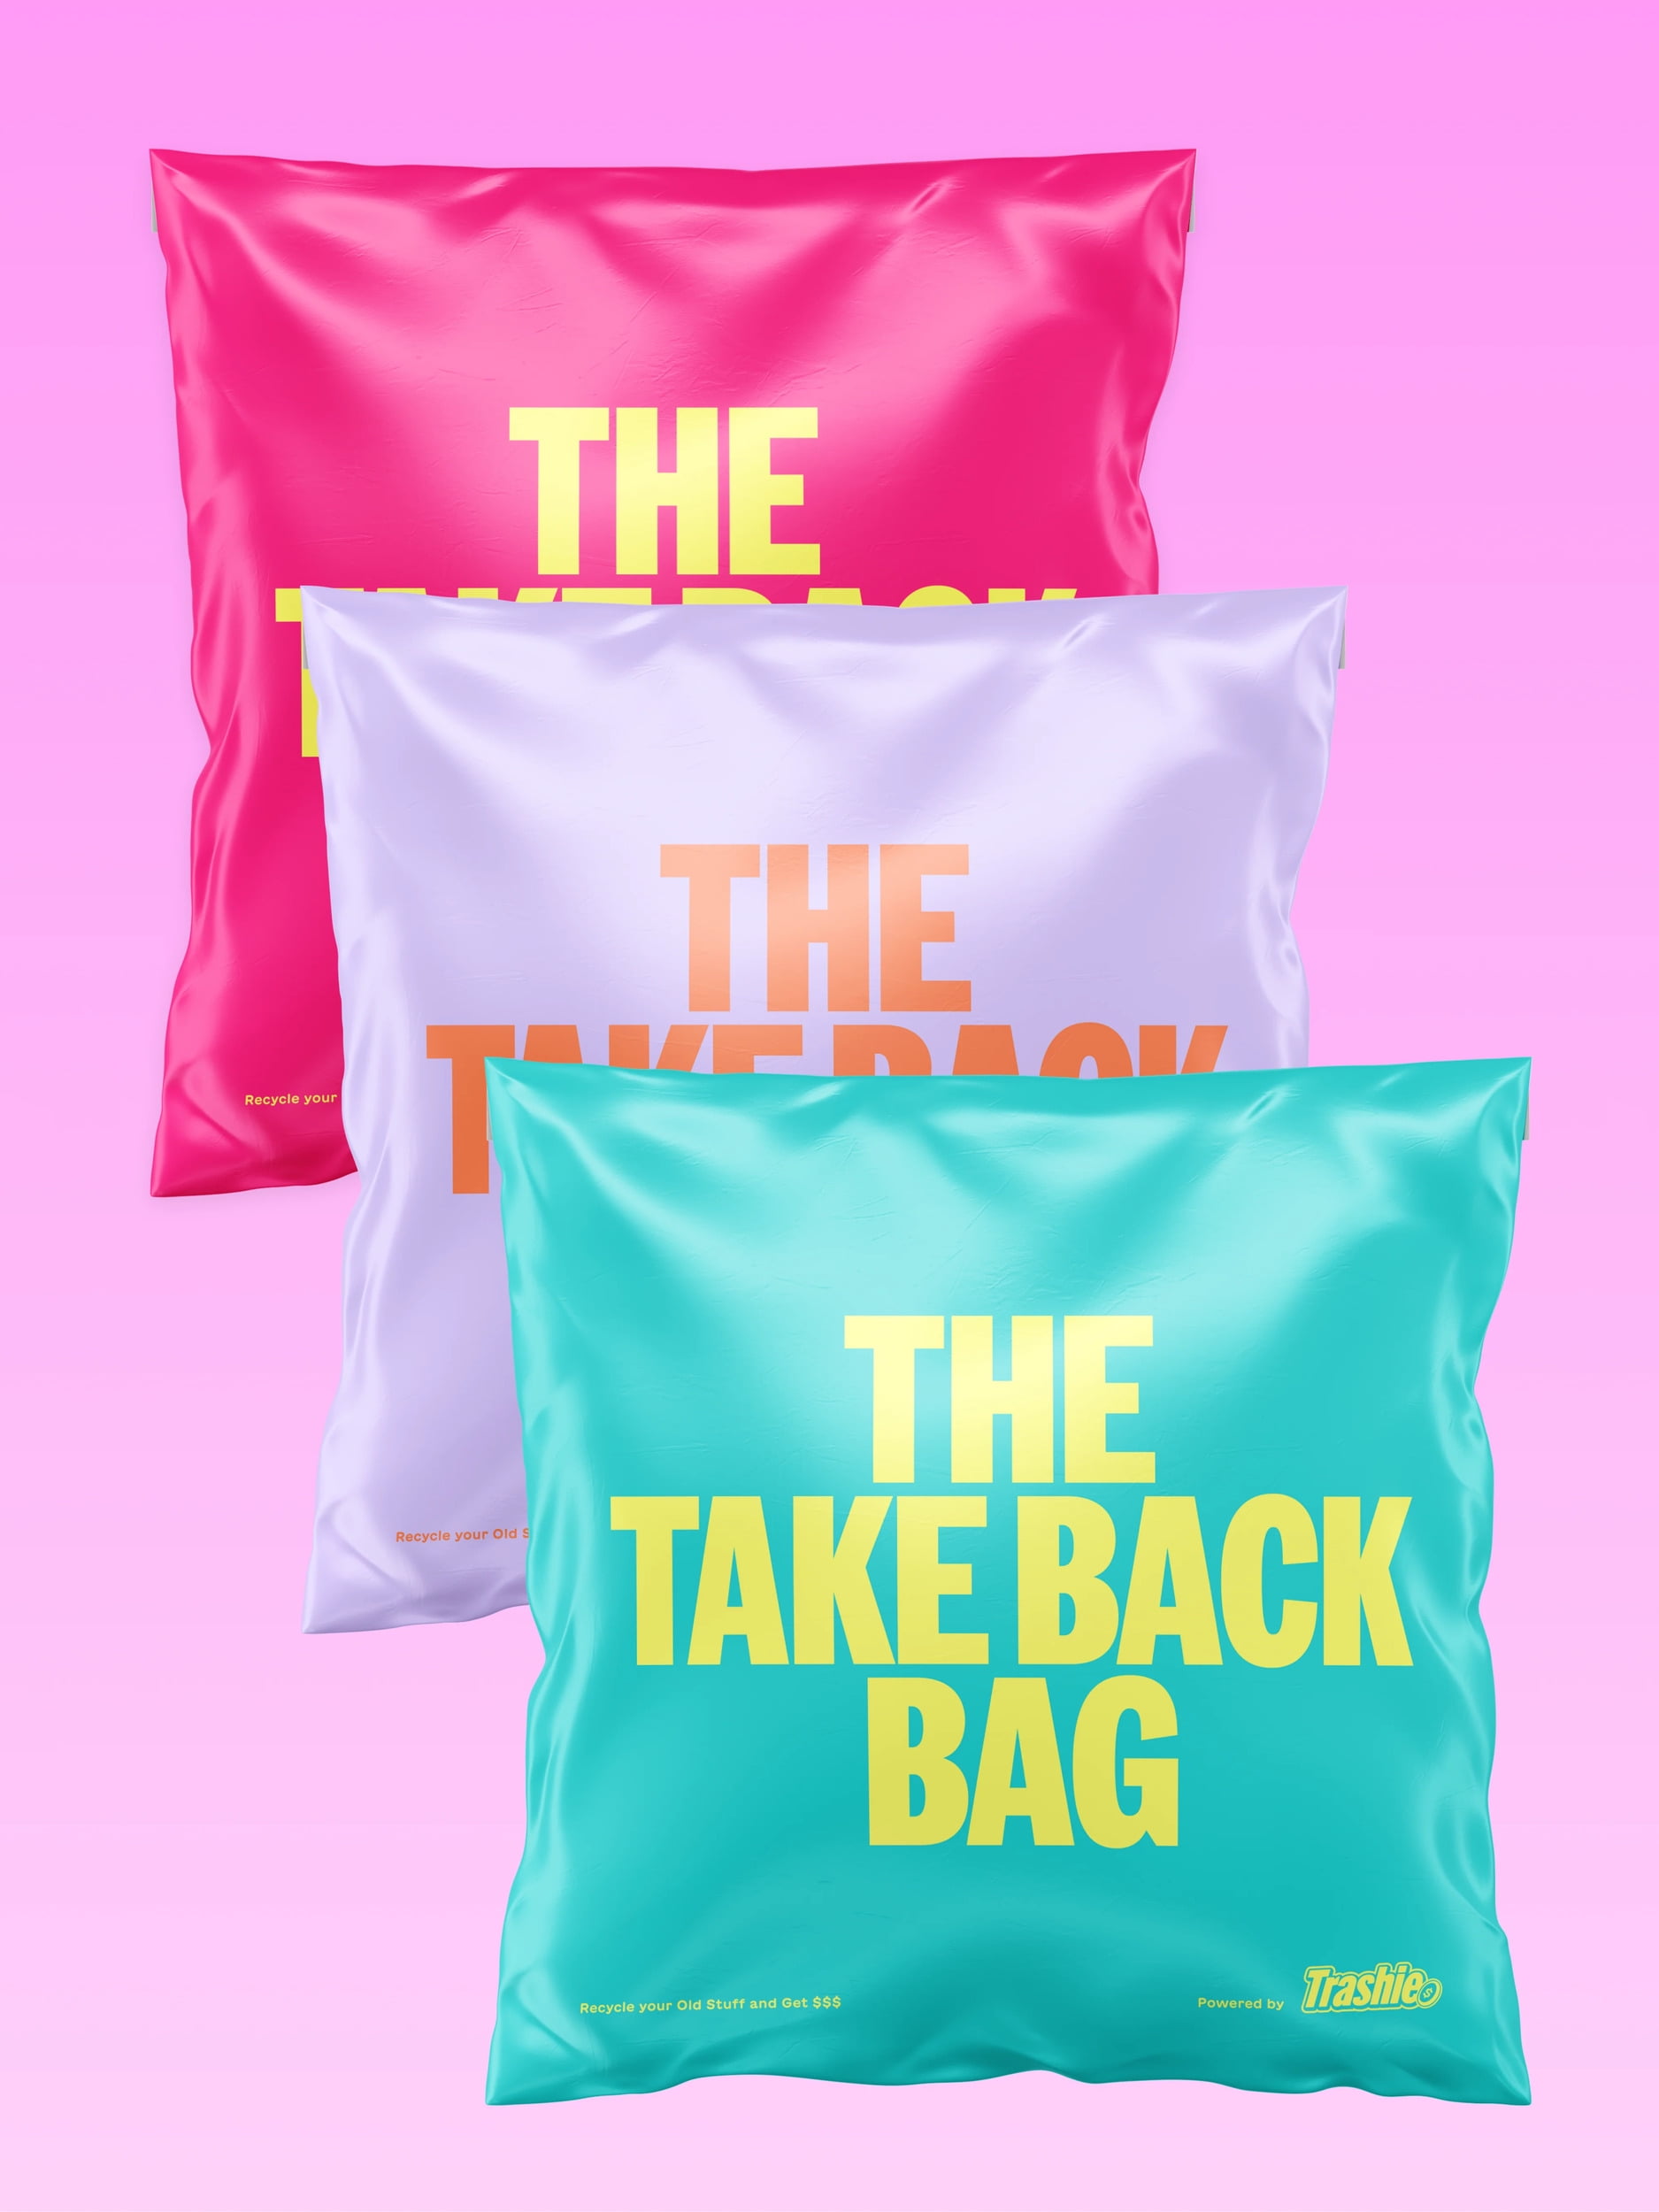 For Days Take Back Bag™ - Textile Recycling Bag